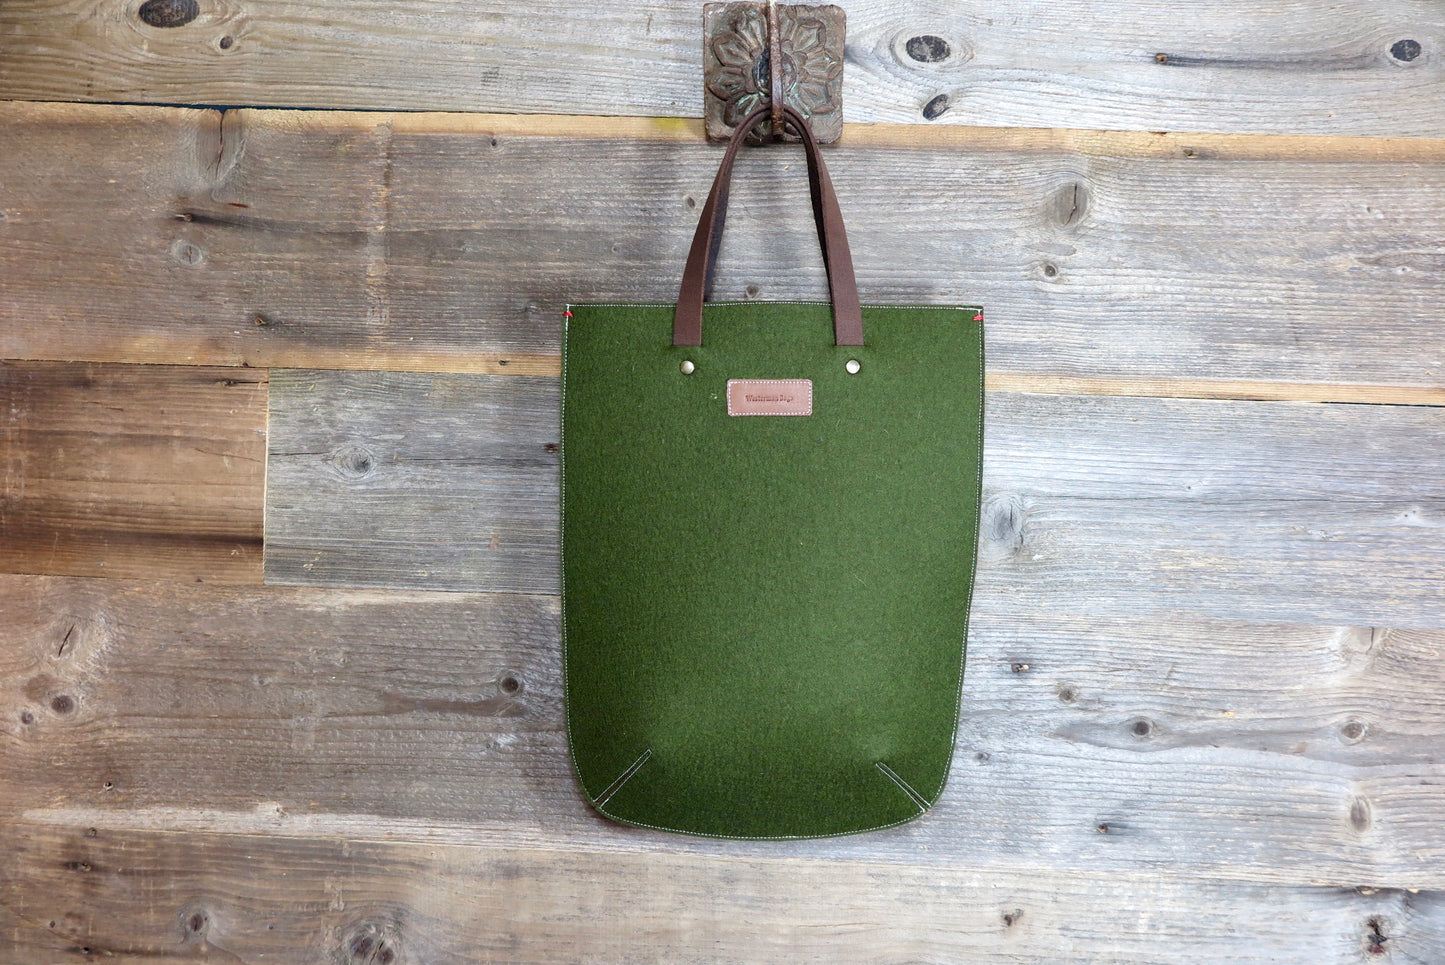 Mossgreen laptopbag woolfelt and leather